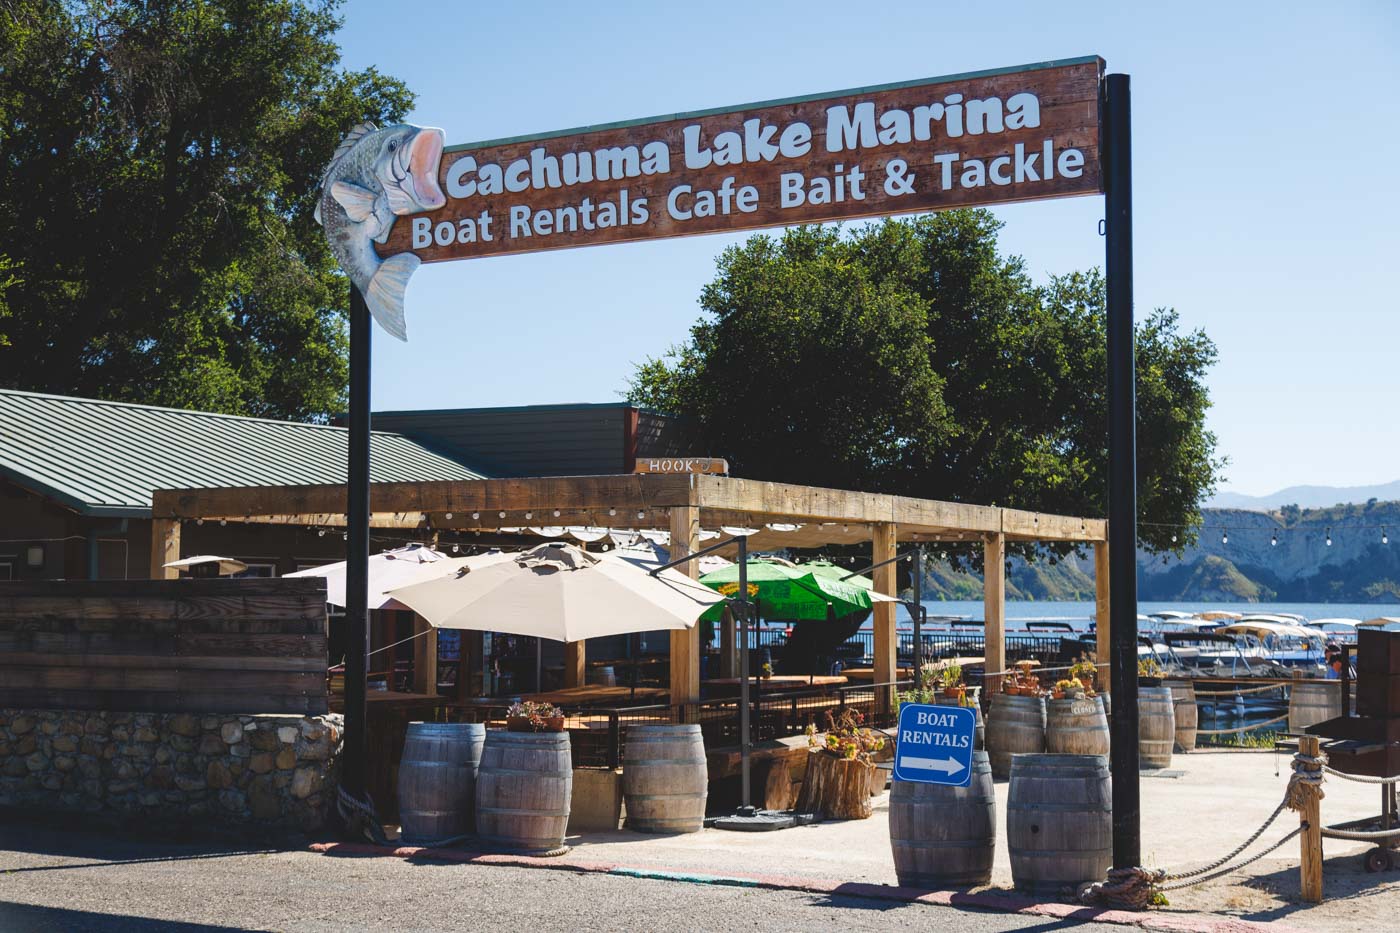 Entrance and sign for Cachuma Lake Marina boat rents in California with views over the pier and restaurant.